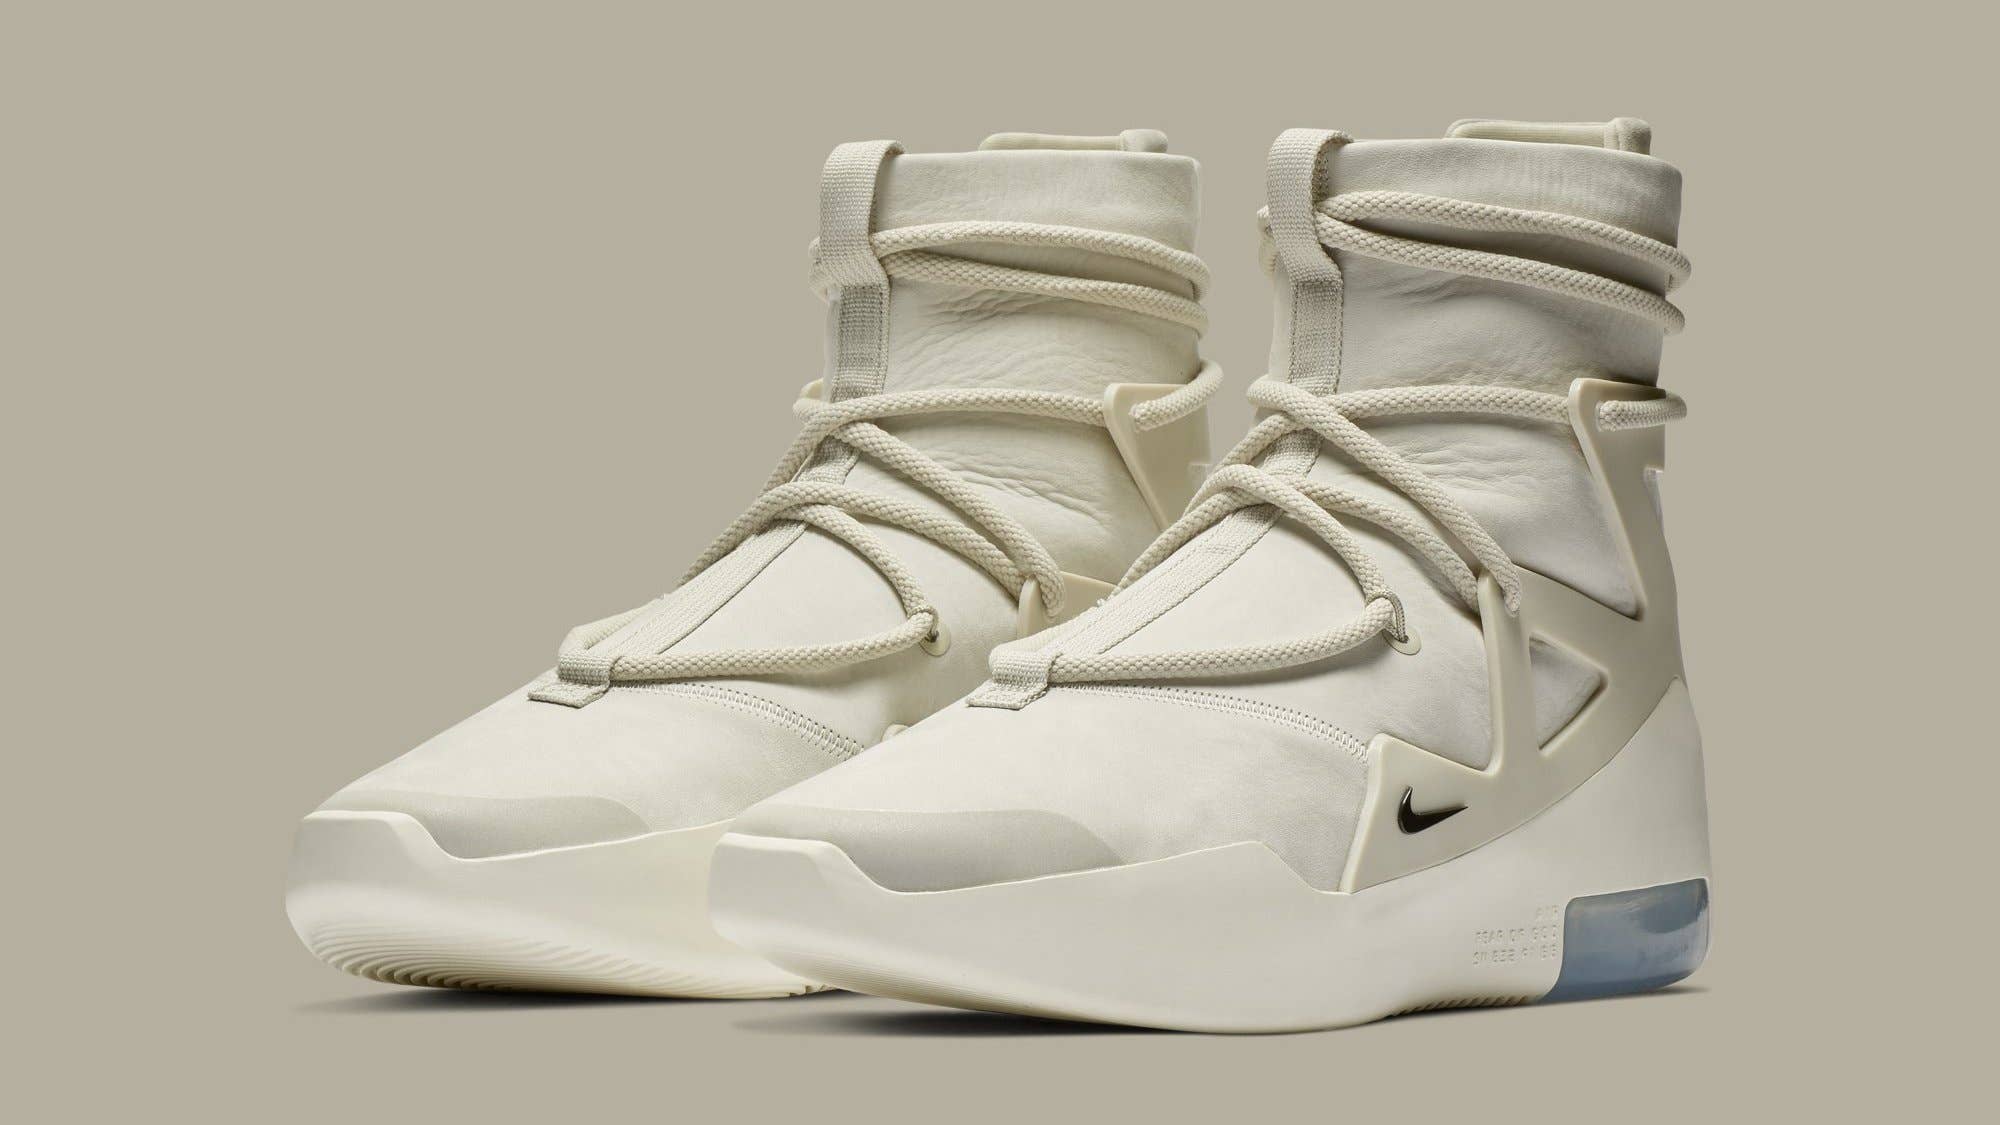 Jerry Air Fear of God 1 Releasing Soon | Complex